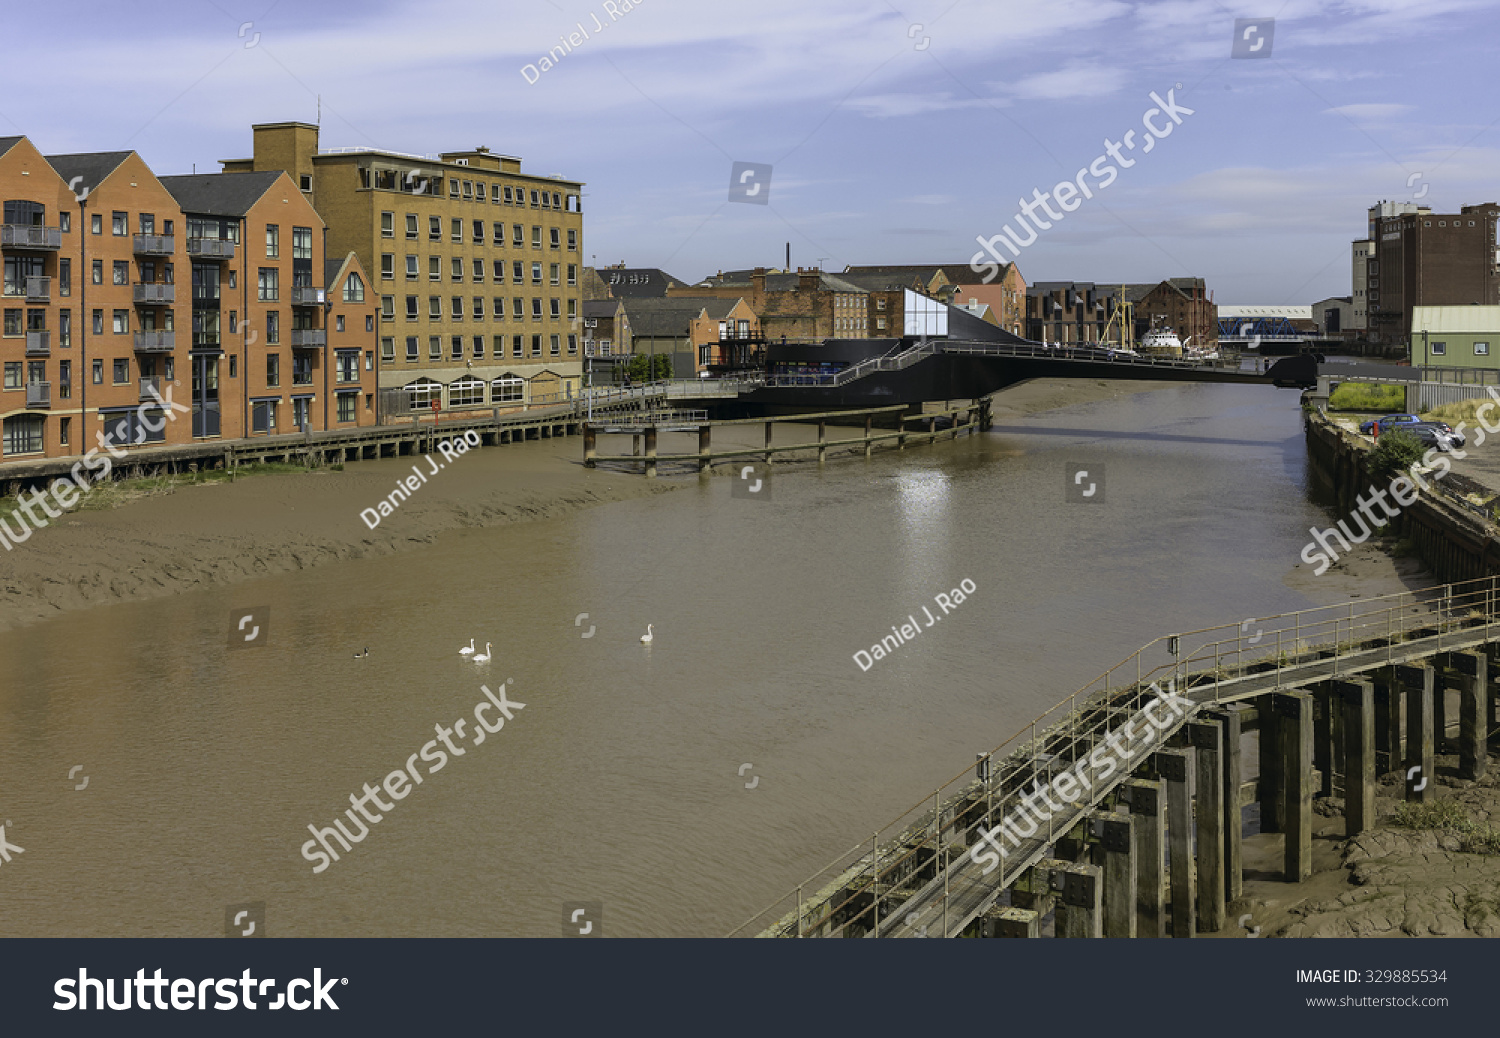 Hull, Humberside, UK. River Hull at low tide with view of Scale Lane swing bridge (open), beached obsolete ship, and flanked by buildings near the estuary, Hull, Humberside, UK. #329885534